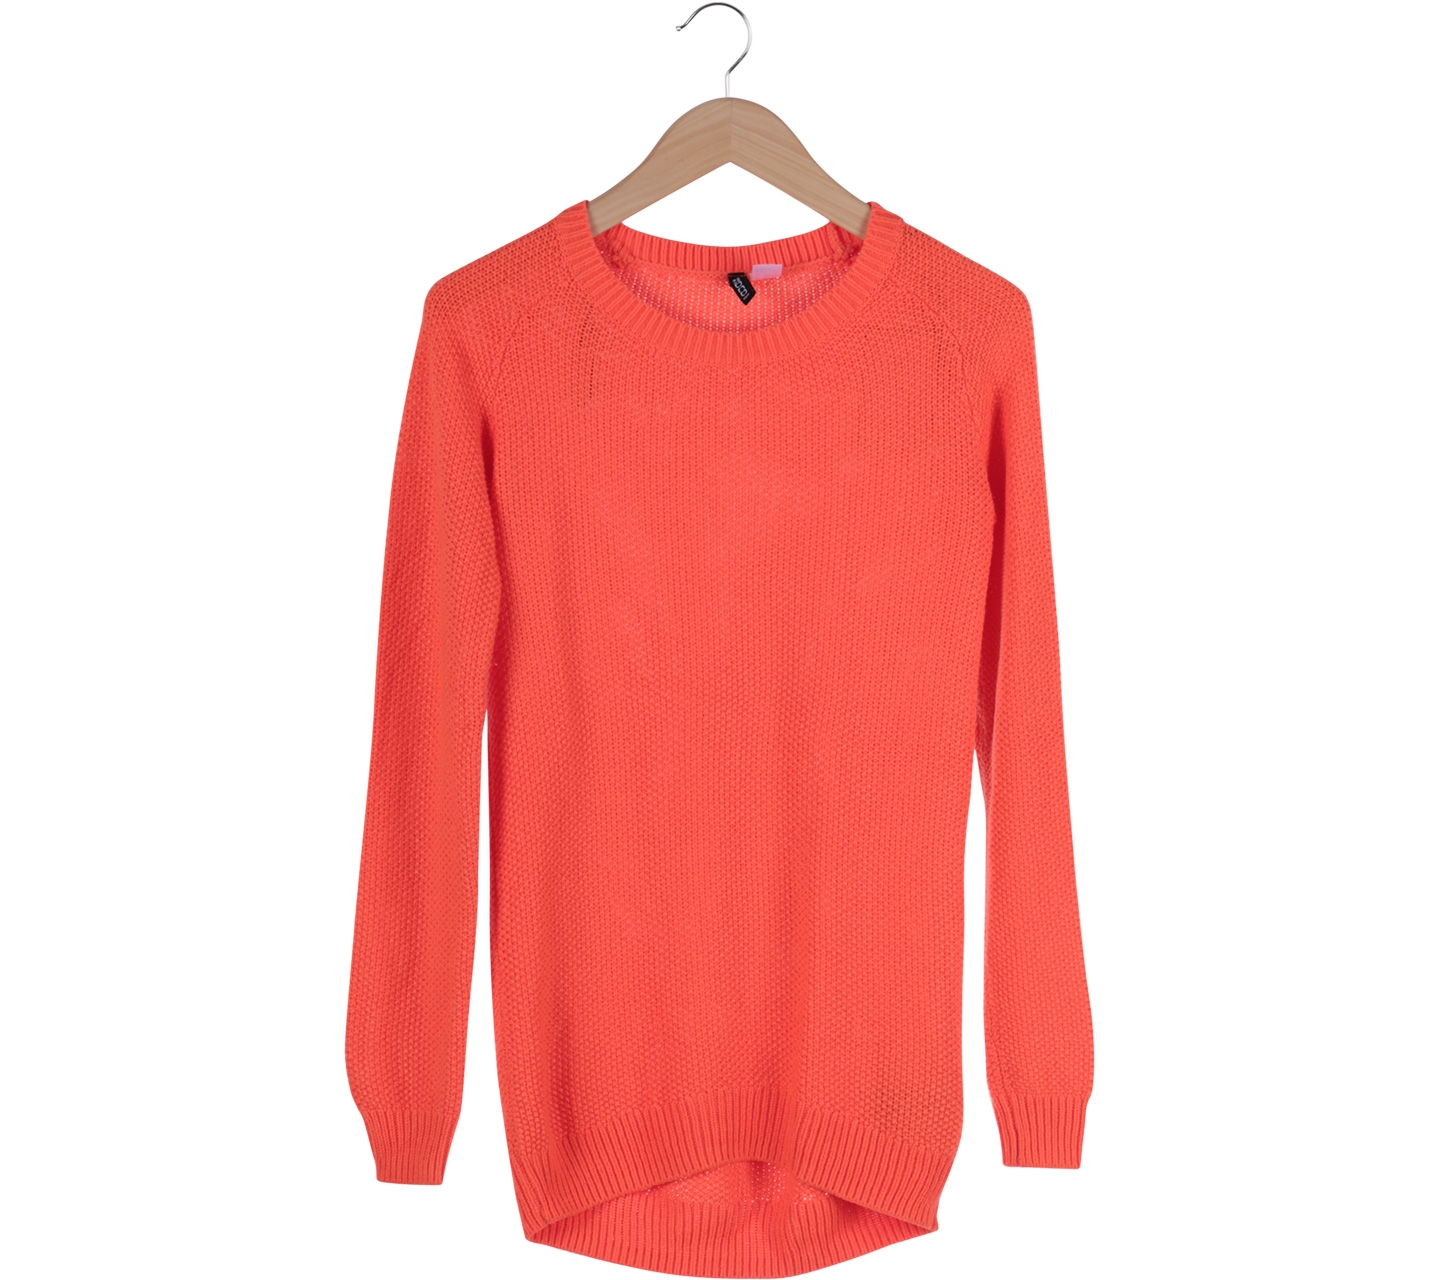 Divided Orange Cable Knitted Sweater